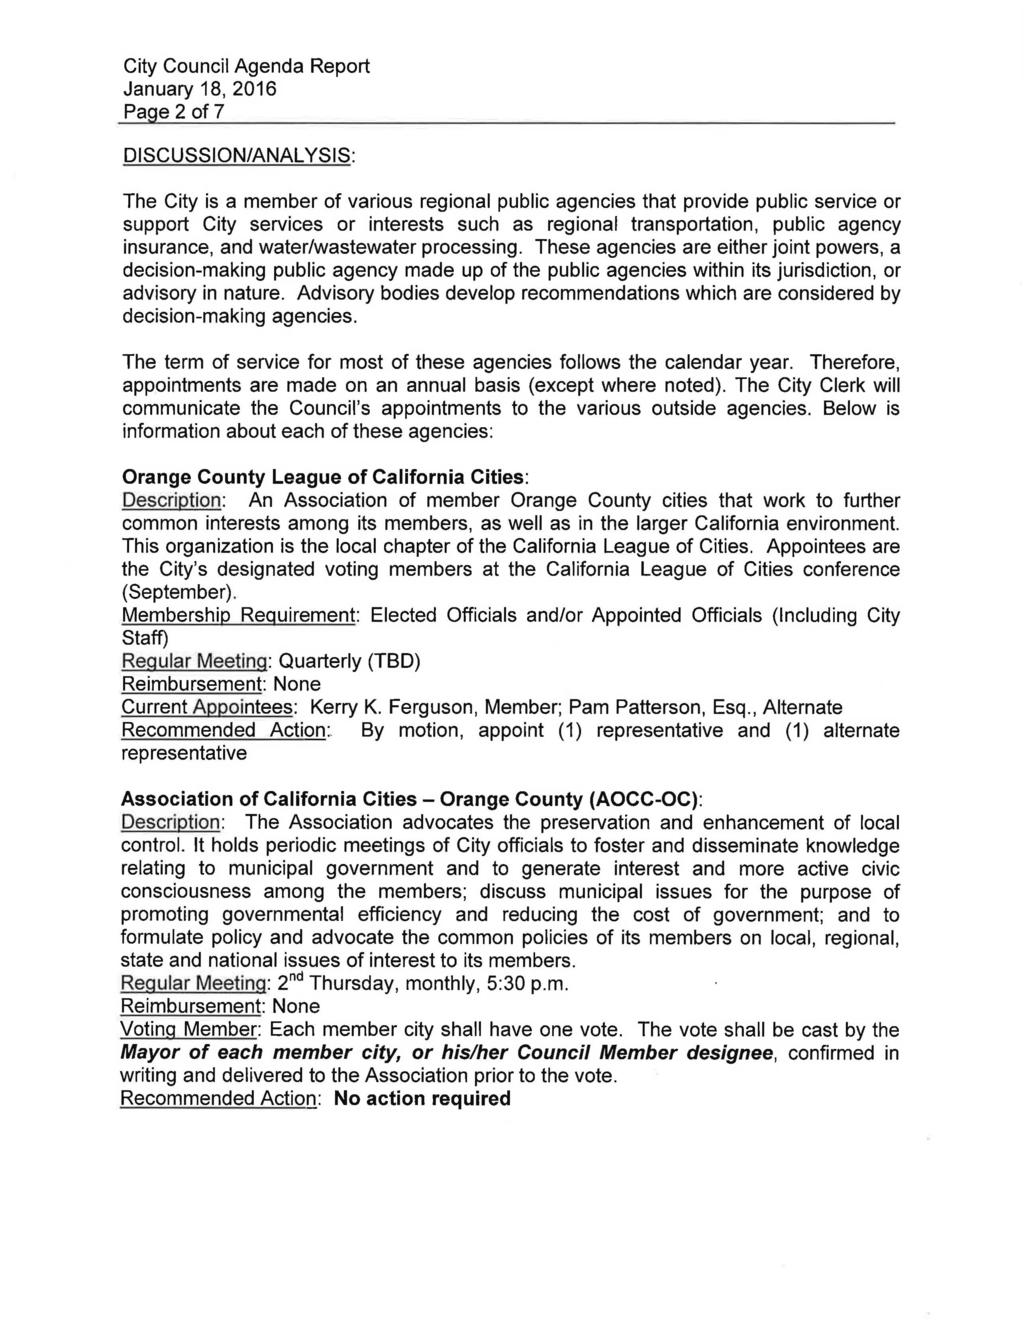 Page 2 of 7 DISCUSSION/ANALYSIS: The City is a member of various regional public agencies that provide public service or support City services or interests such as regional transportation, public